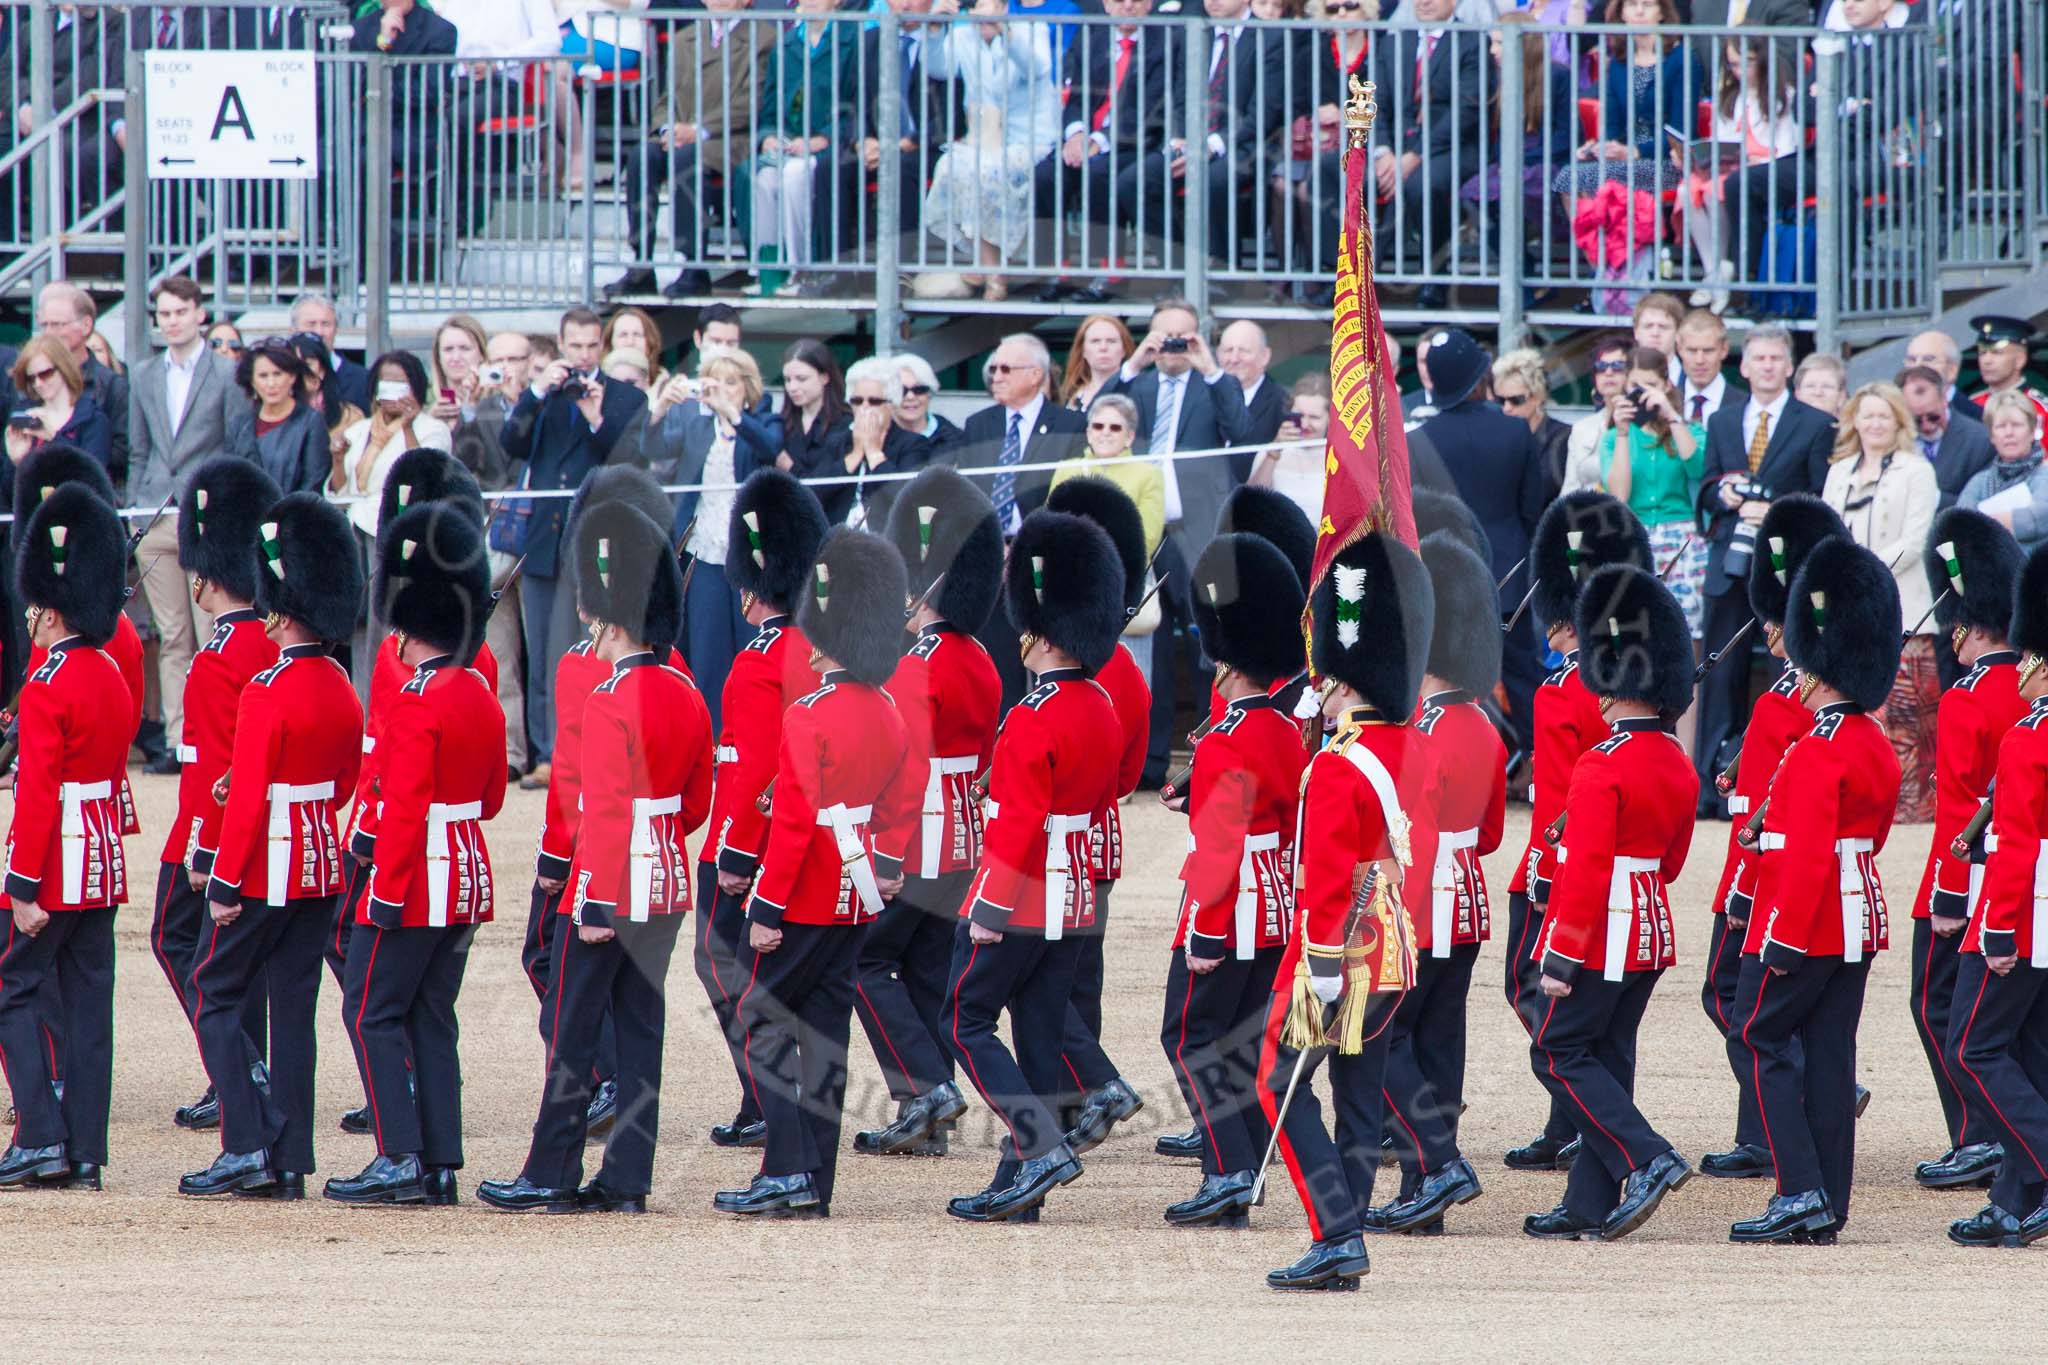 Trooping the Colour 2013: The Escort Tto the Colour is marching towards No.6 Guard, to begin the trooping the Colour through the ranks. Image #484, 15 June 2013 11:24 Horse Guards Parade, London, UK